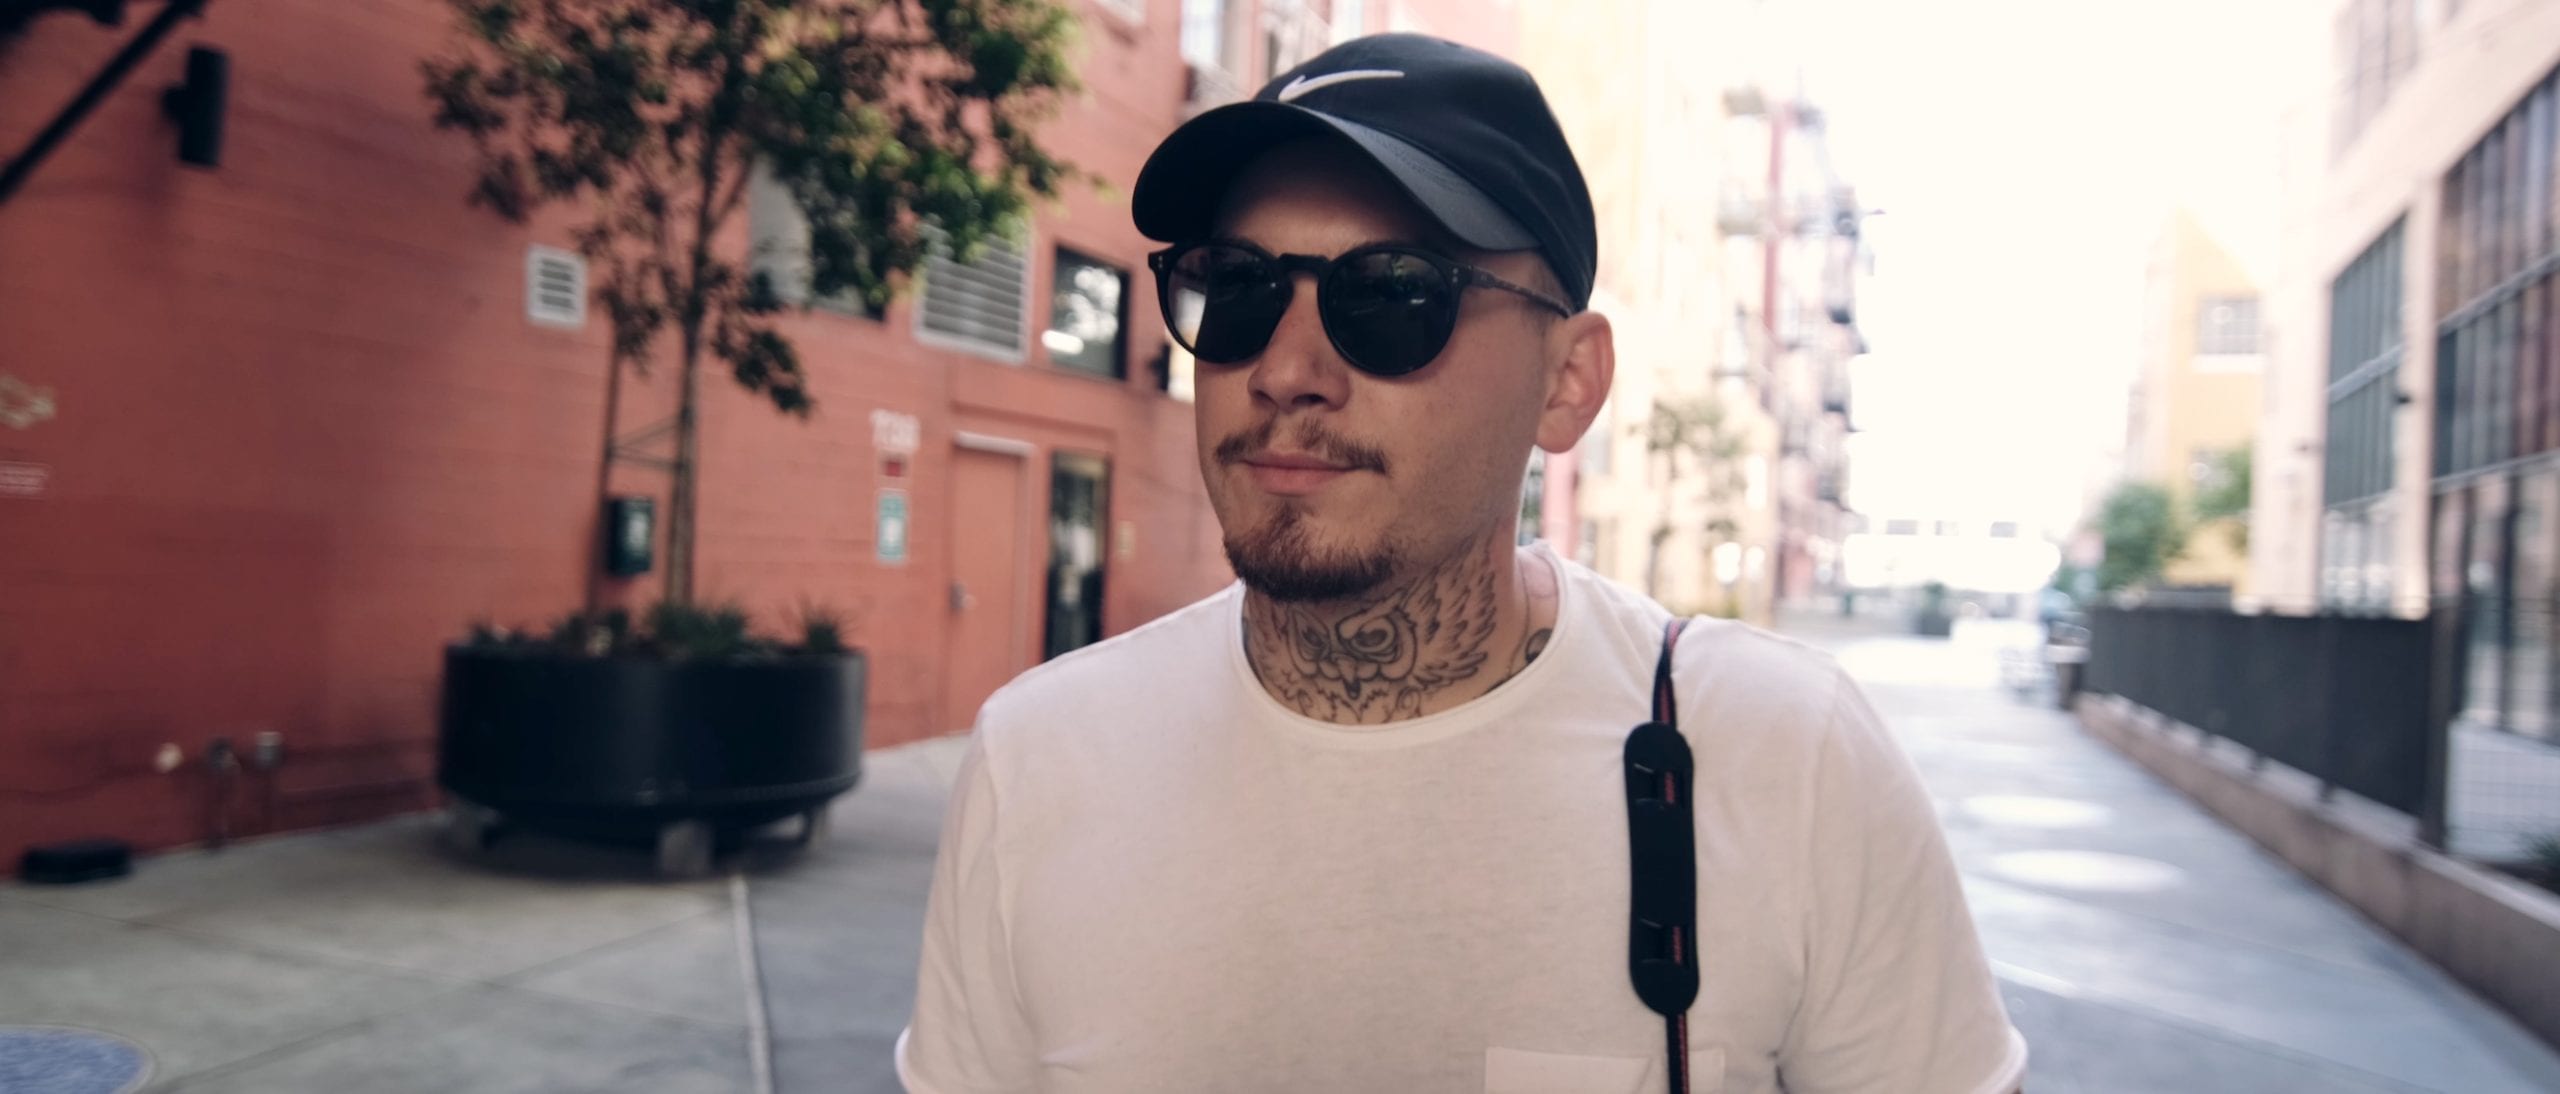 We're live with Dan Perri on Uncreative Radio EP 116 Dan with tattoos on his neck wearing a black Nike cap with white logo and sunglasses walking down an alley